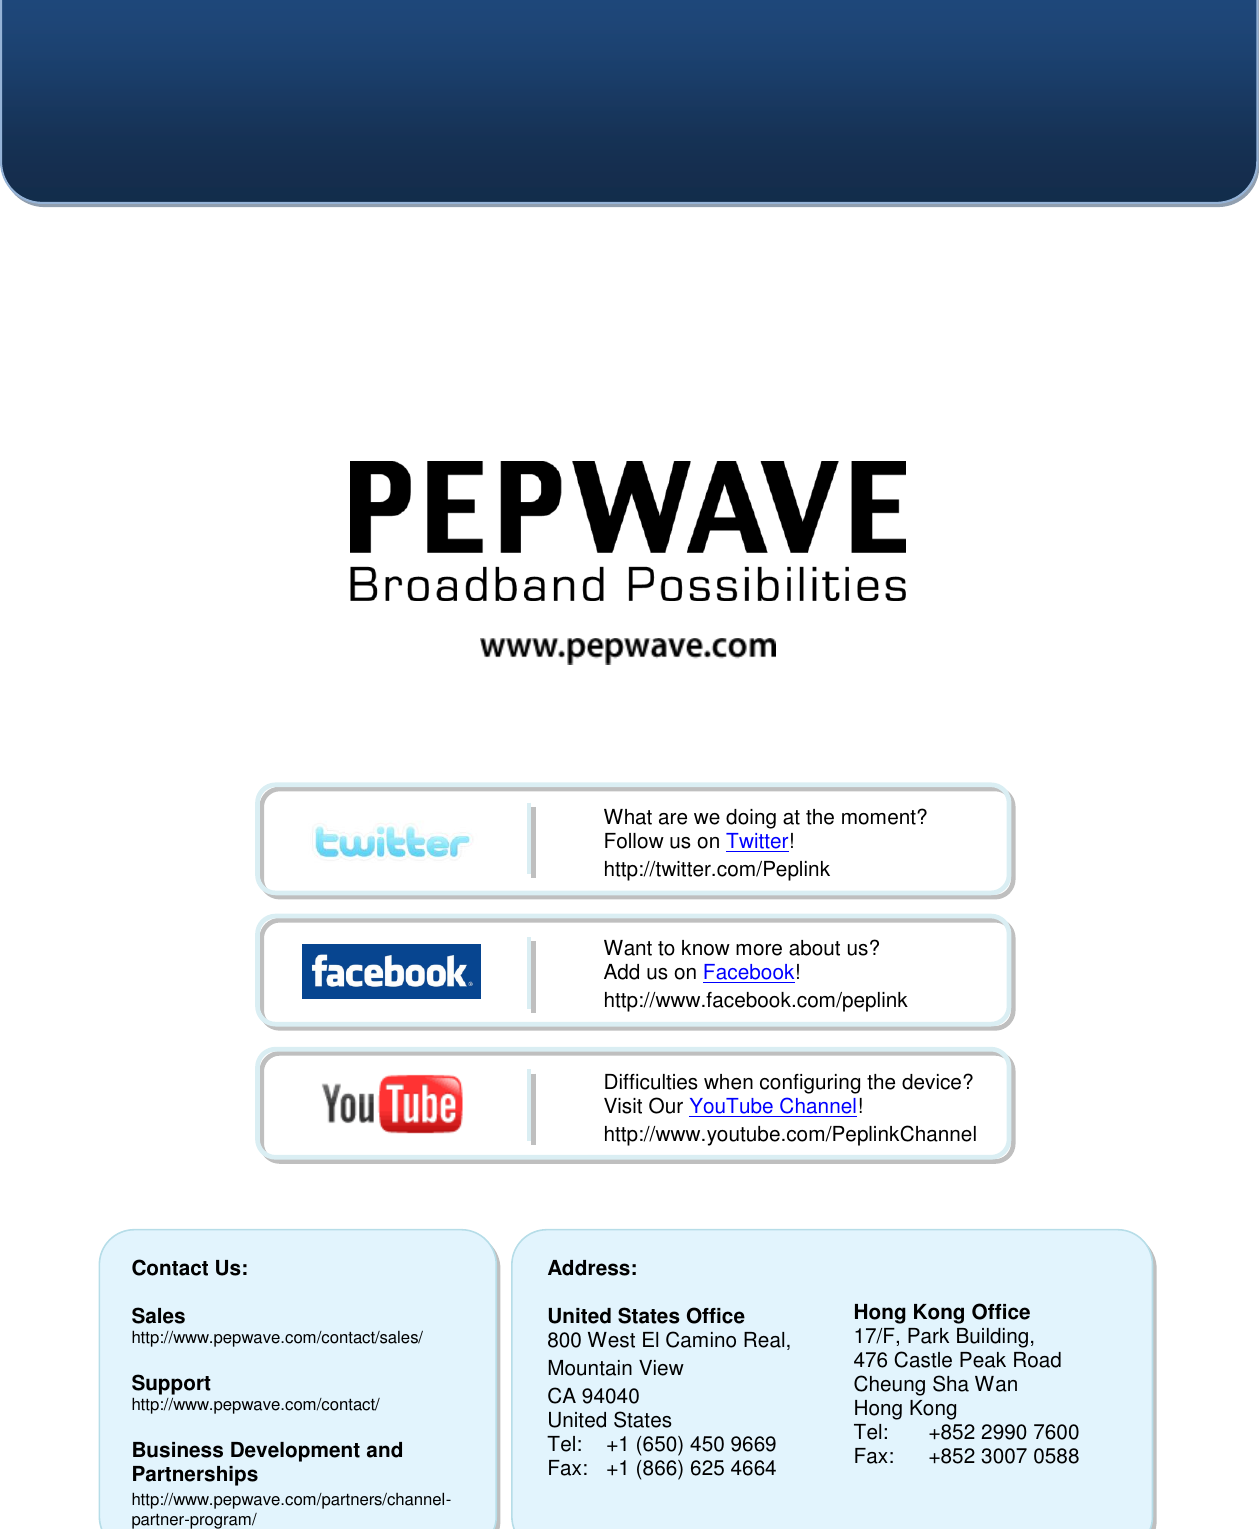    Contact Us:  Sales http://www.pepwave.com/contact/sales/  Support http://www.pepwave.com/contact/  Business Development and Partnerships http://www.pepwave.com/partners/channel-partner-program/ Address:  United States Office 800 West El Camino Real, Mountain View CA 94040 United States Tel:  +1 (650) 450 9669 Fax:  +1 (866) 625 4664   Hong Kong Office 17/F, Park Building, 476 Castle Peak Road Cheung Sha Wan Hong Kong Tel:  +852 2990 7600 Fax:  +852 3007 0588  What are we doing at the moment? Follow us on Twitter! http://twitter.com/Peplink Want to know more about us? Add us on Facebook! http://www.facebook.com/peplink Difficulties when configuring the device?  Visit Our YouTube Channel! http://www.youtube.com/PeplinkChannel  